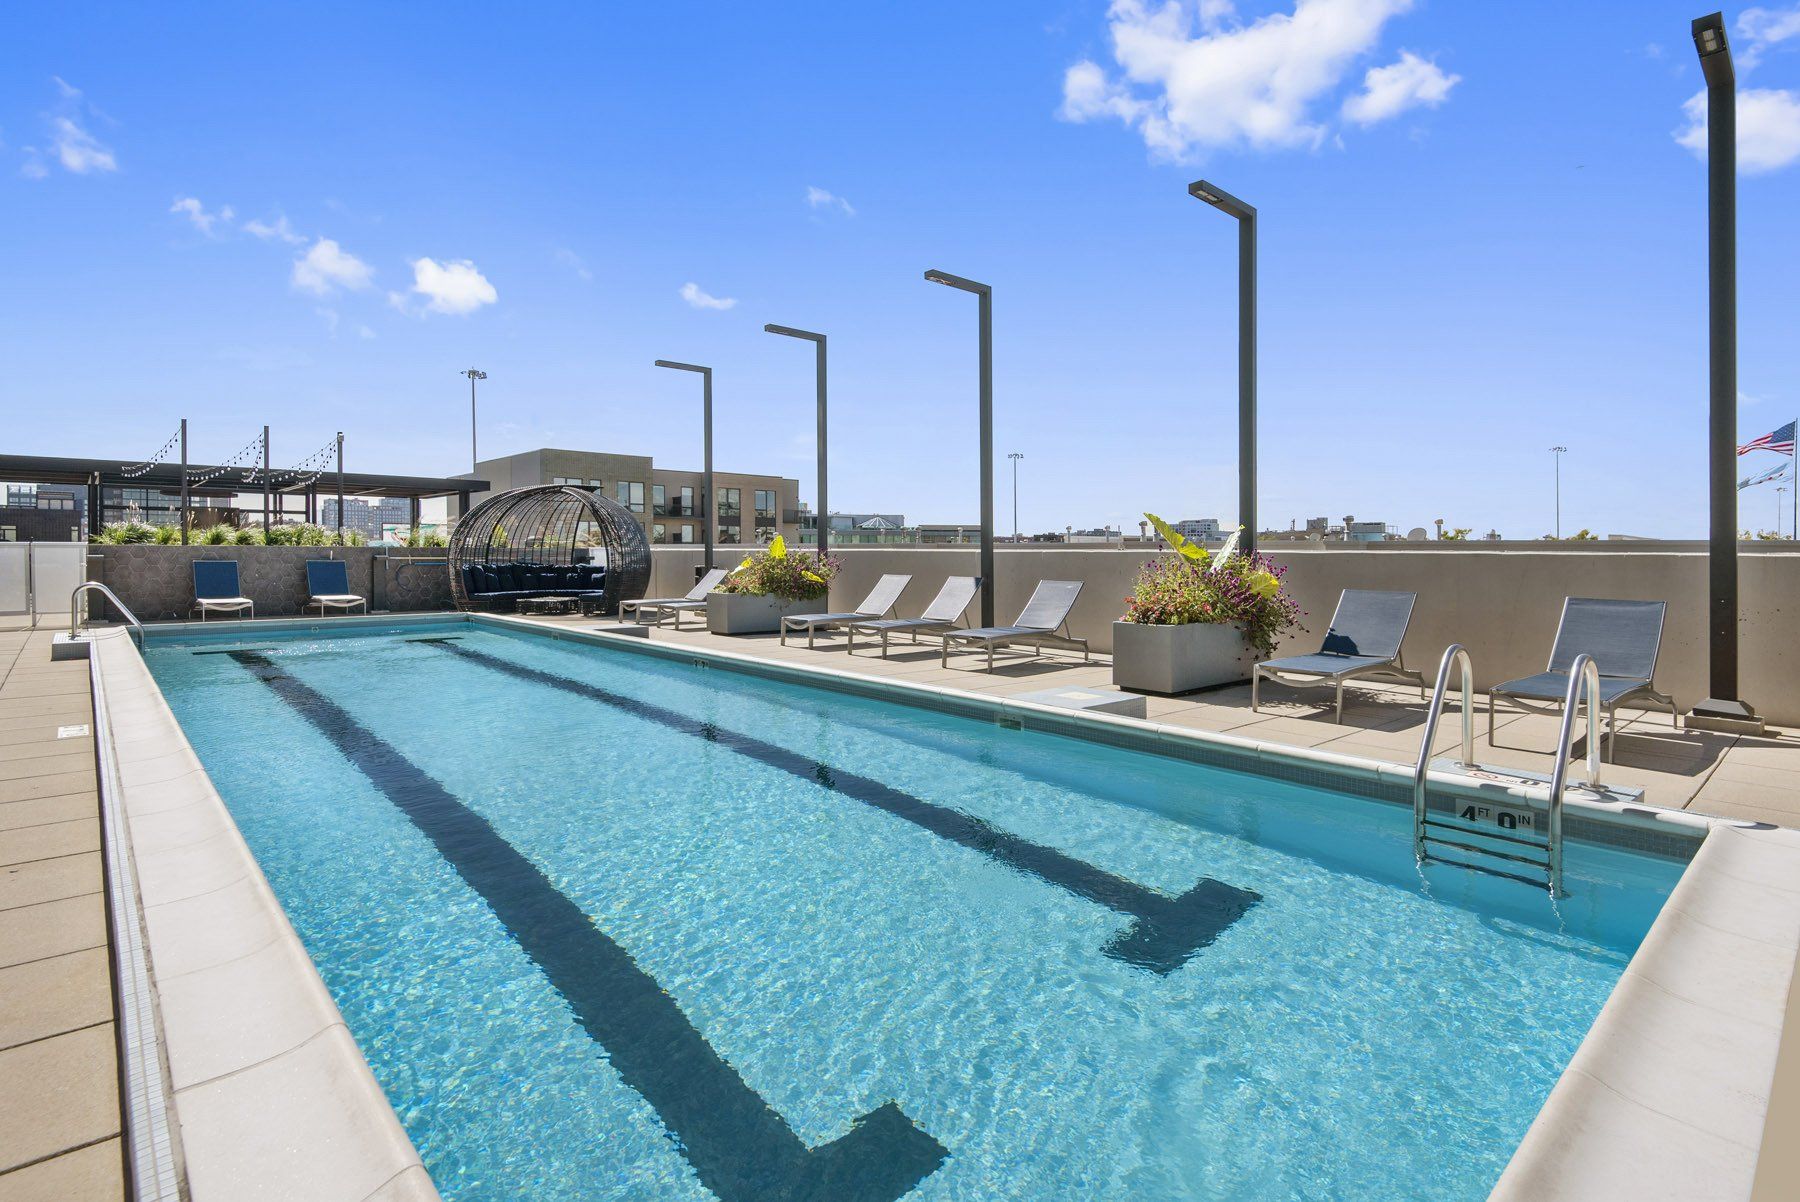 A large swimming pool with chairs and umbrellas around it at Reside on Green Street.